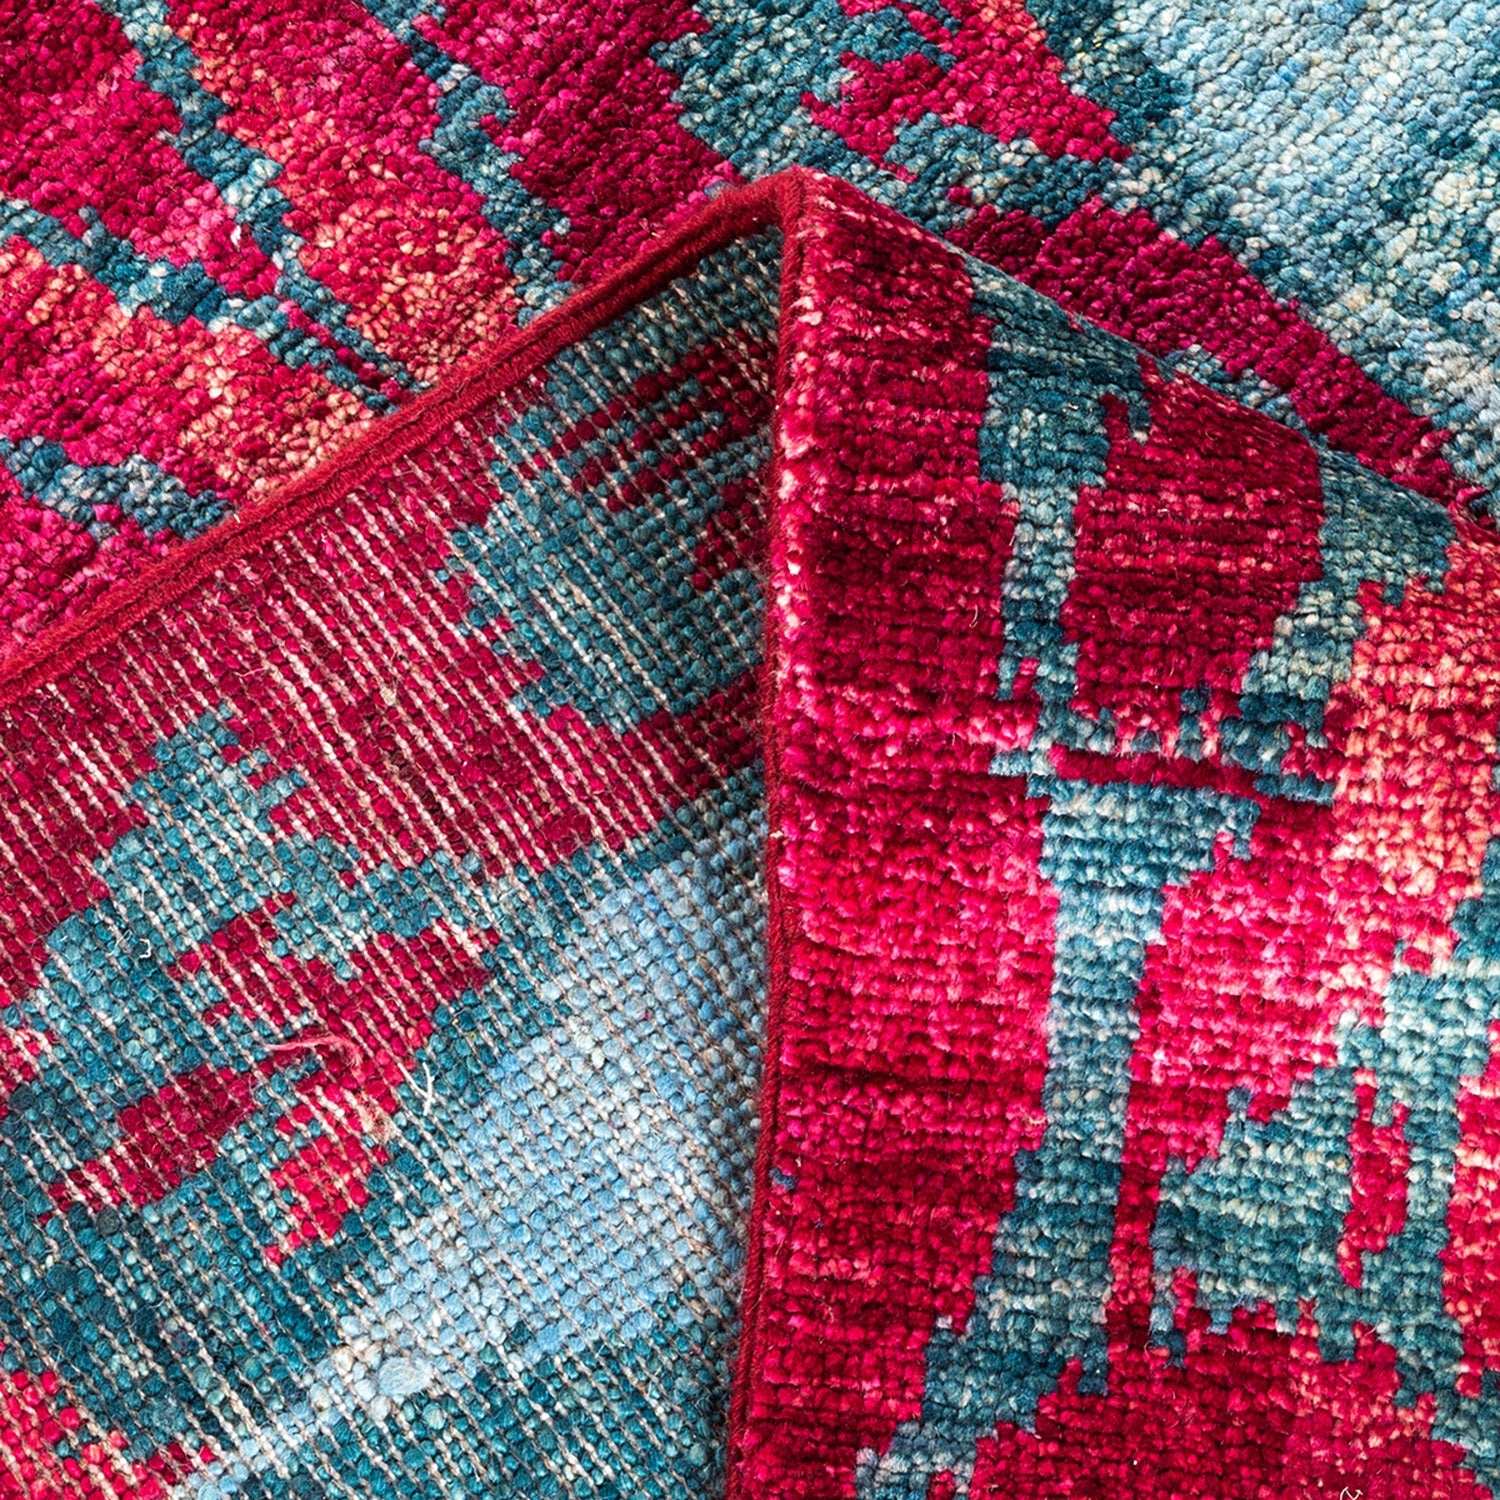 Close-up view of a red and blue woven textile's pattern.